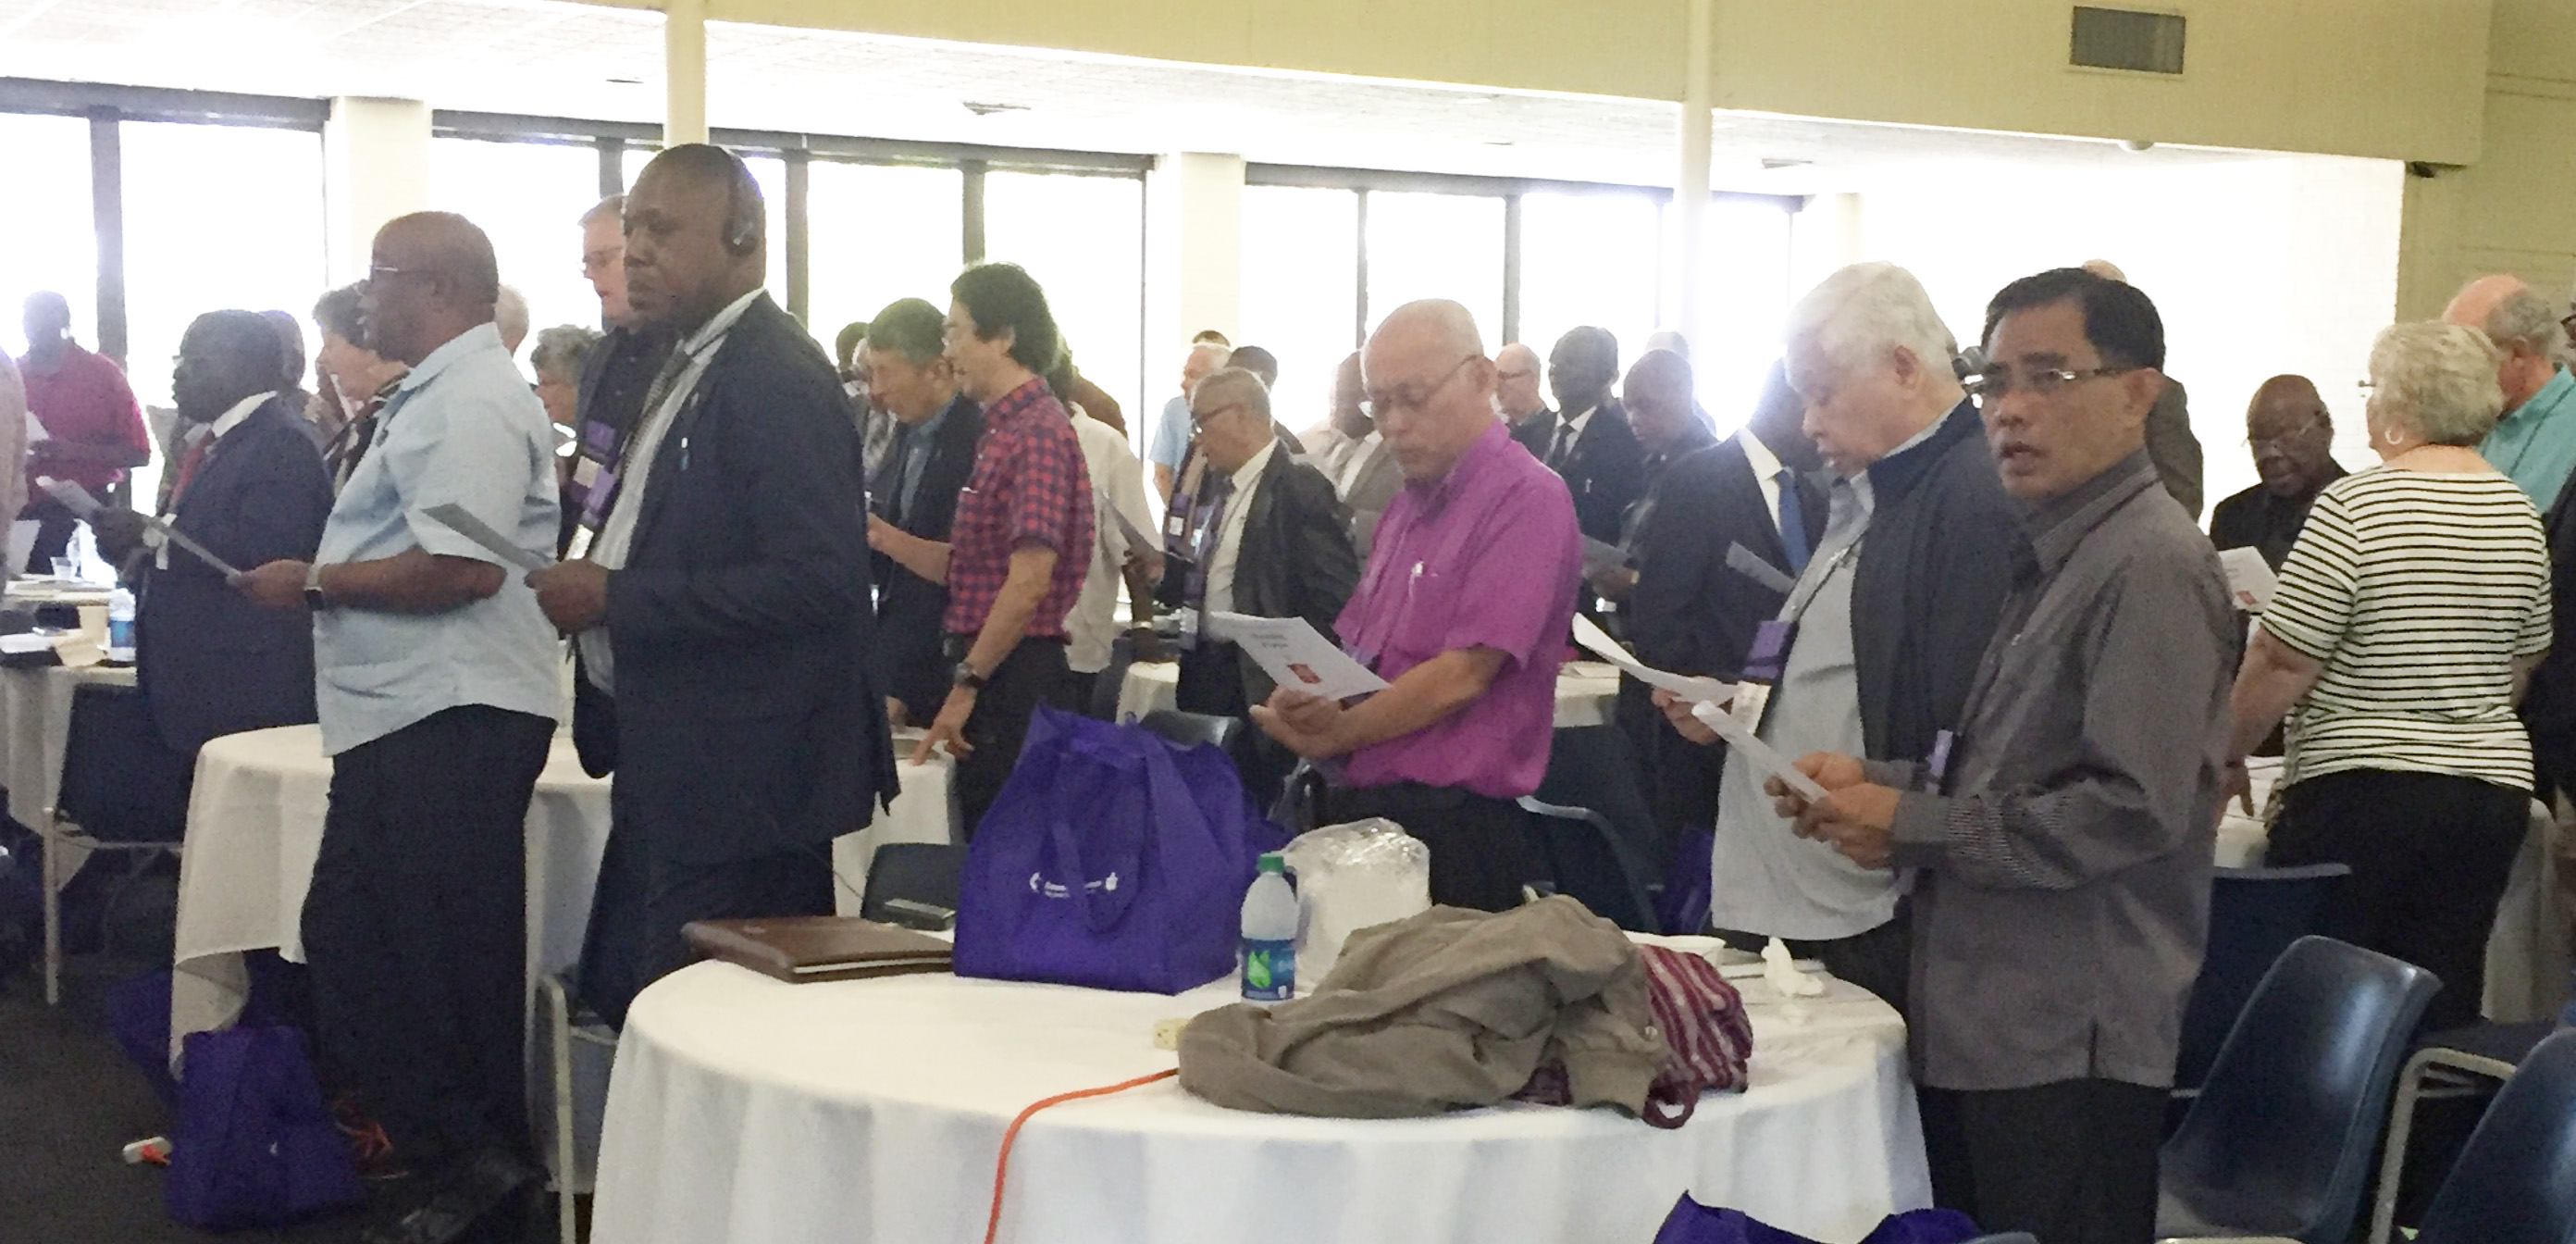 Filipino bishops worship with their colleagues during the United Methodist Council of Bishops November meeting on St. Simons Island, Ga. The Filipino bishops urged United Methodists in the Philippines to continue in holy conversation and prayer leading up to the 2019 General Conference. Photo by Heather Hahn, UMNS.